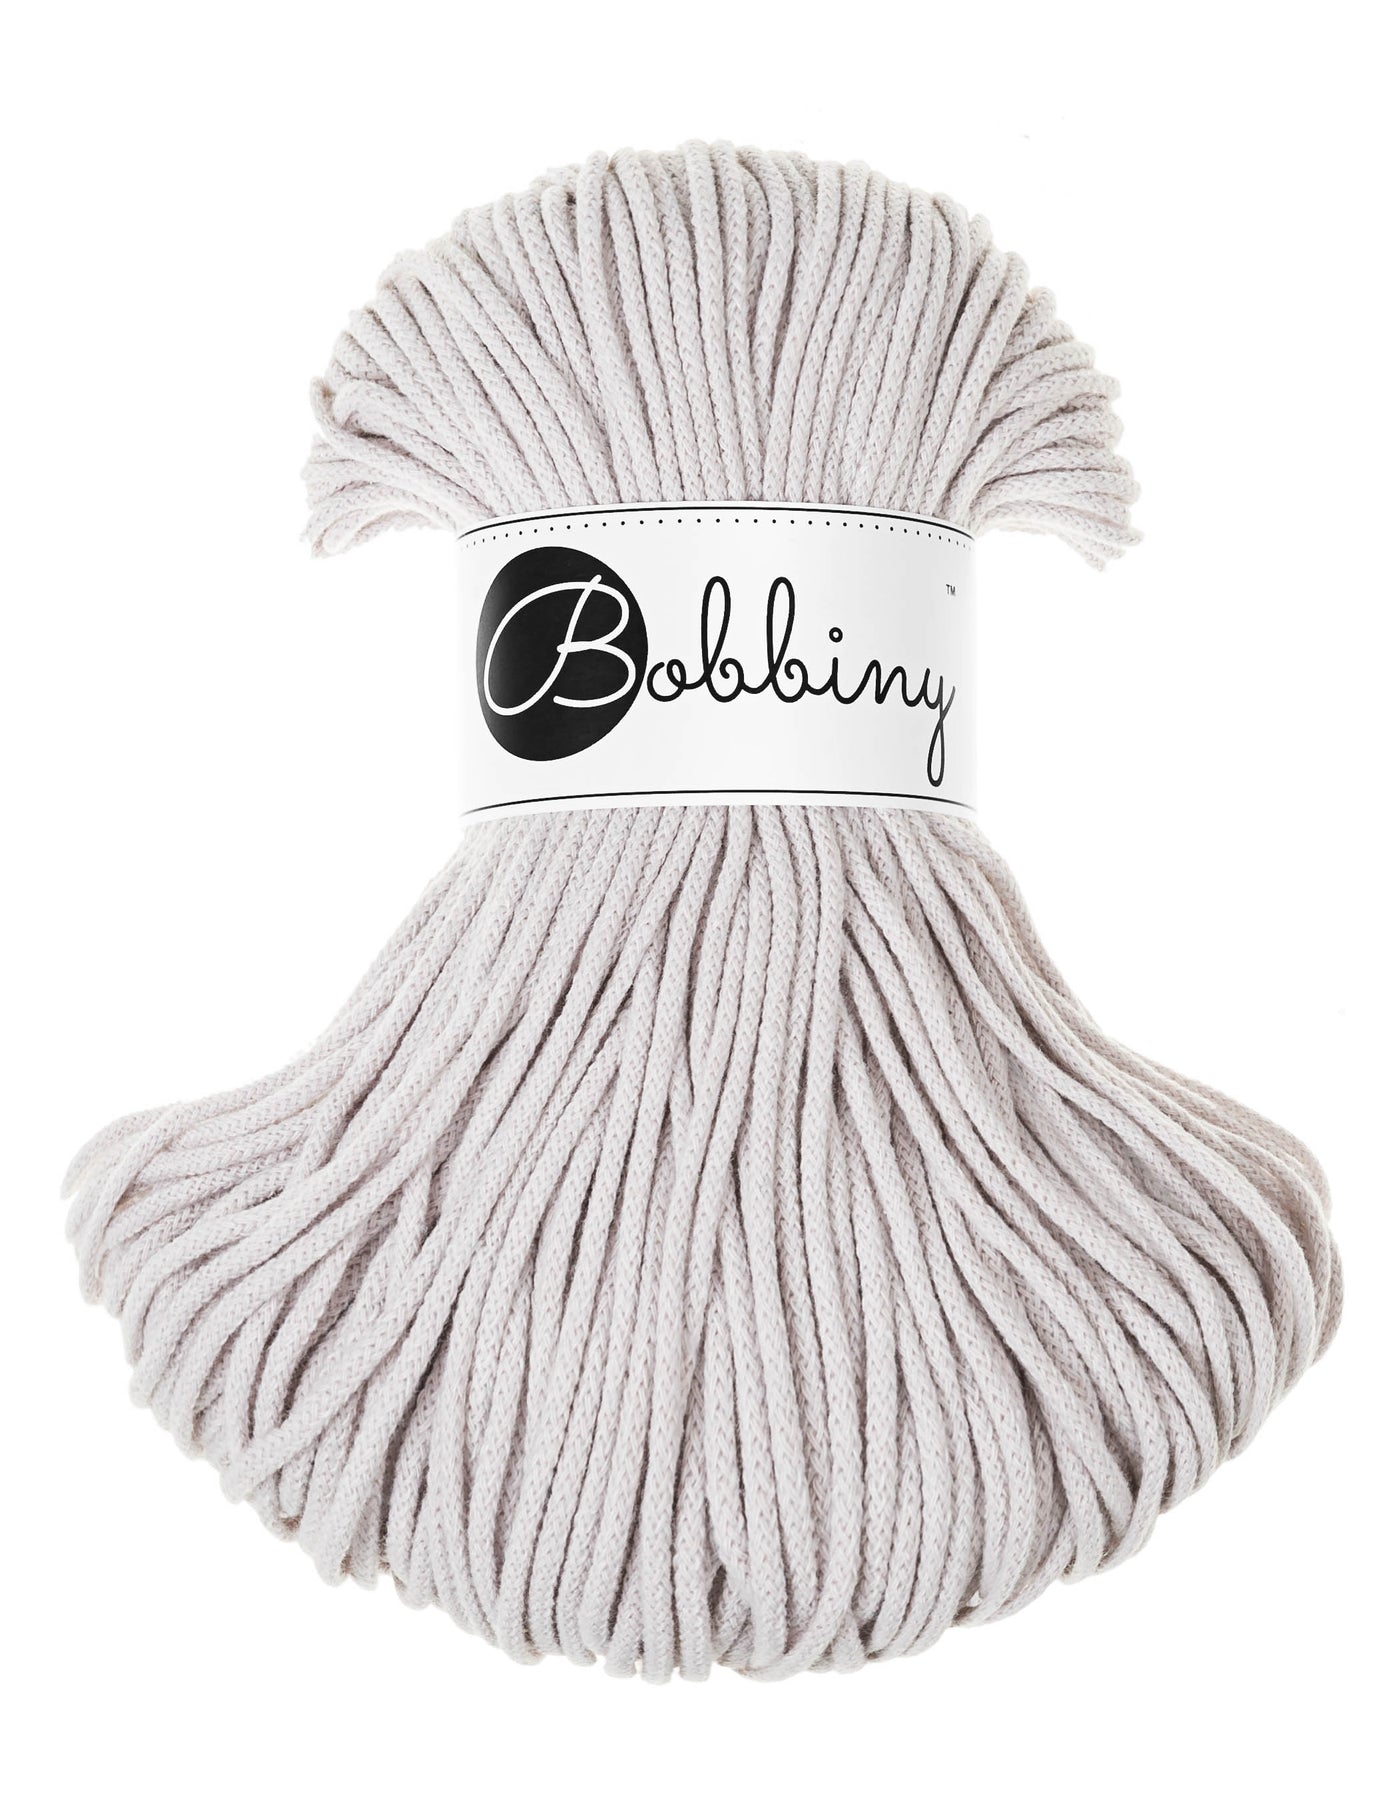 These beautiful Bobbiny cords are made in Poland from 100% recycled cottons and are non-toxic, certified safe for children and meet certified worldwide textile standards.  3mm Diameter  100 metres Length  Recommended for use with 8-10mm crochet or knitting needles  Cotton inner and outer layers